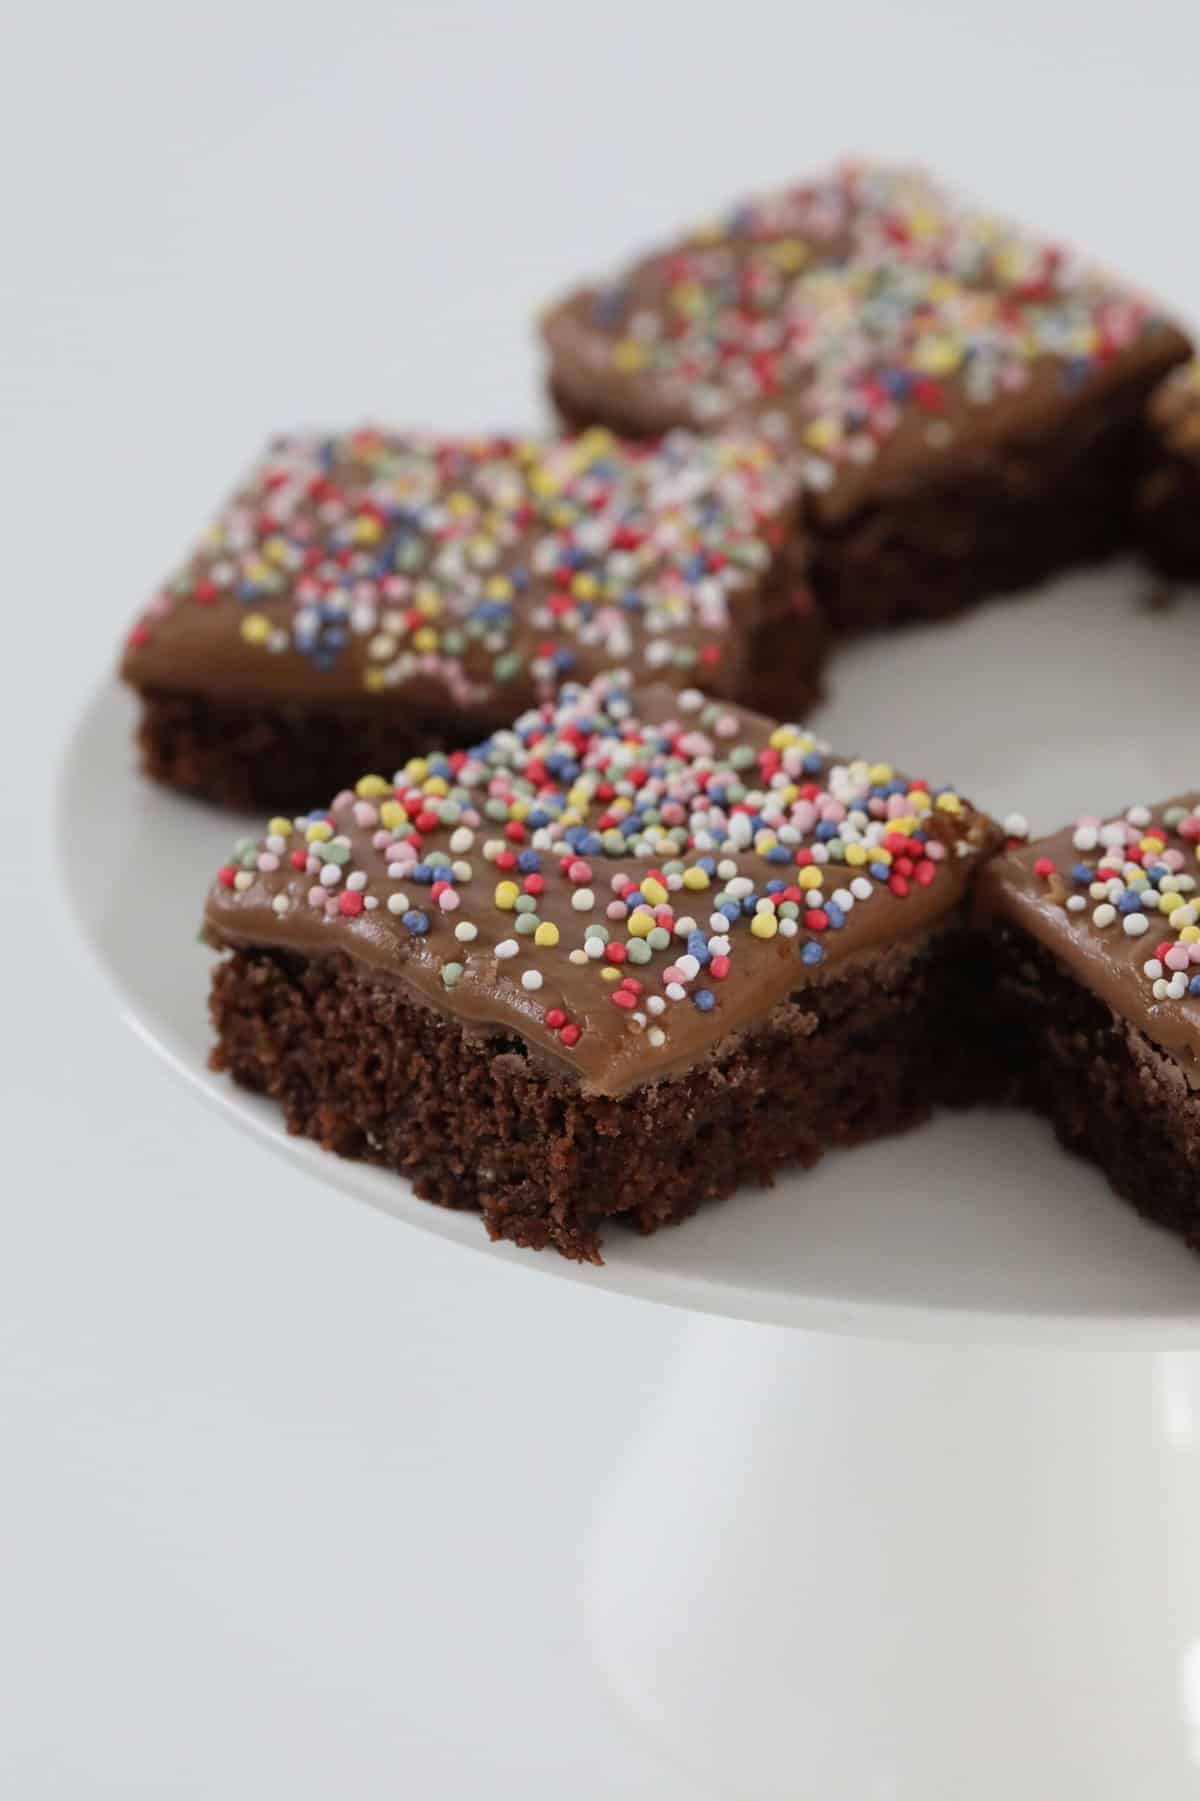 Pieces of chocolate slice with sprinkles on top.